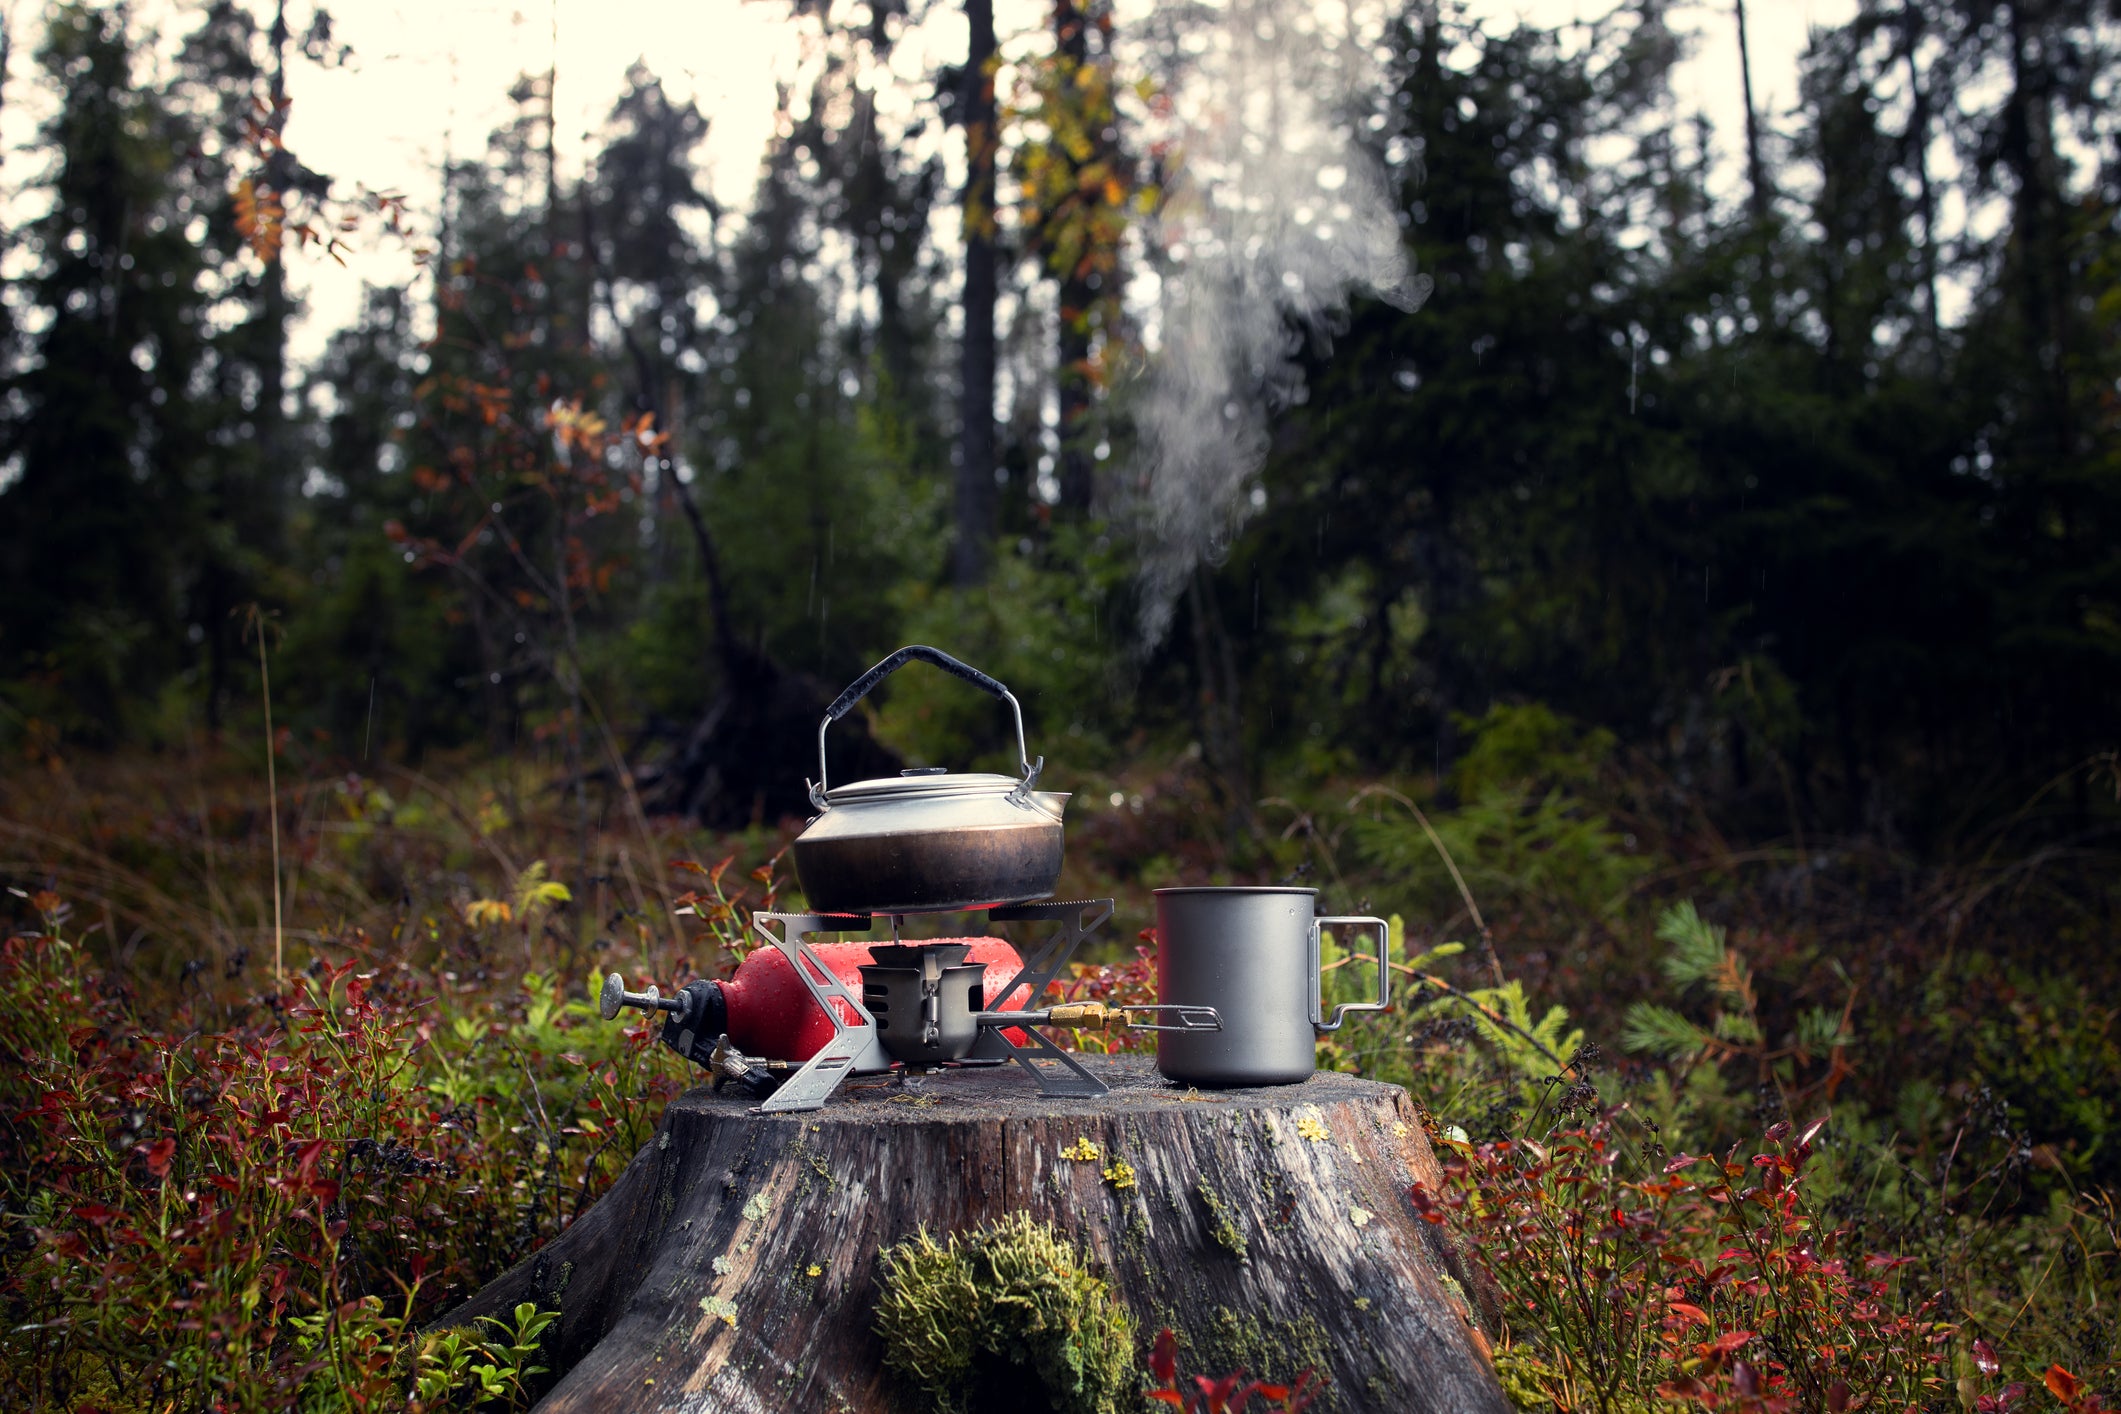 cooking food using camping stove